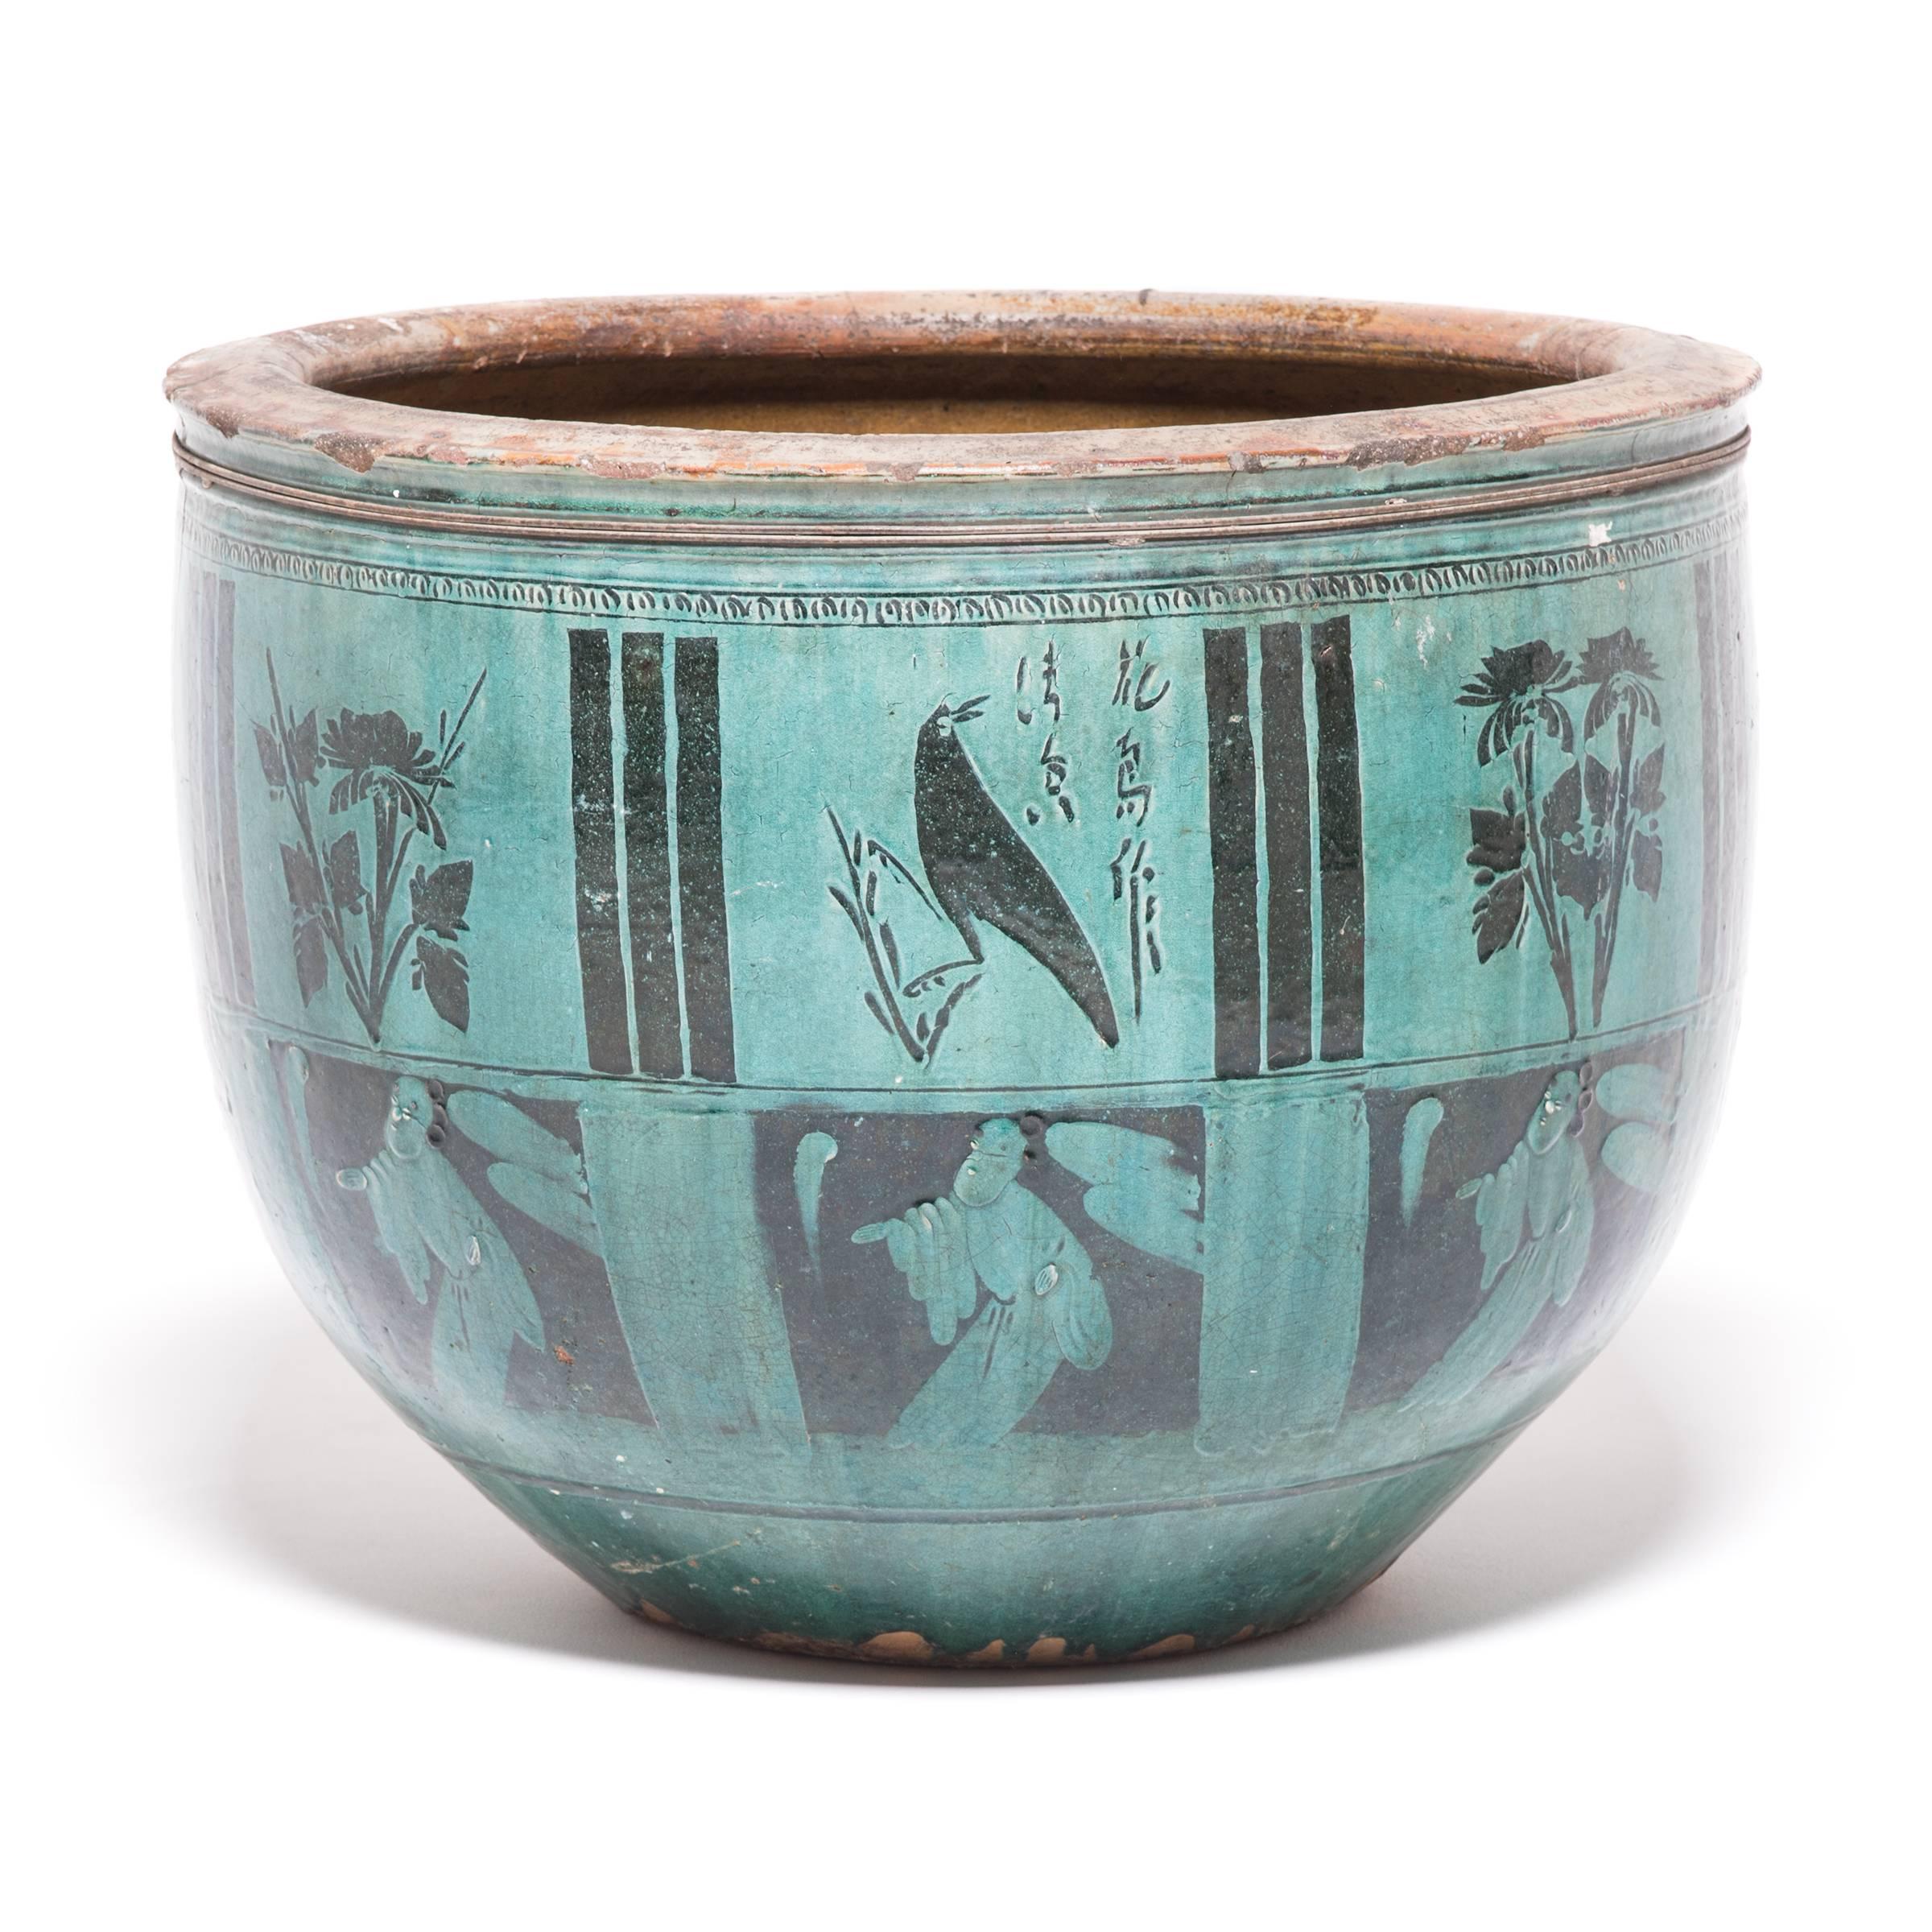 Like red- and black-figure pottery created by ancient Greeks, this striking container alternates two decorative techniques that make careful use of positive and negative space. Atop an under layer of jade green glaze, the vessel's upper panels